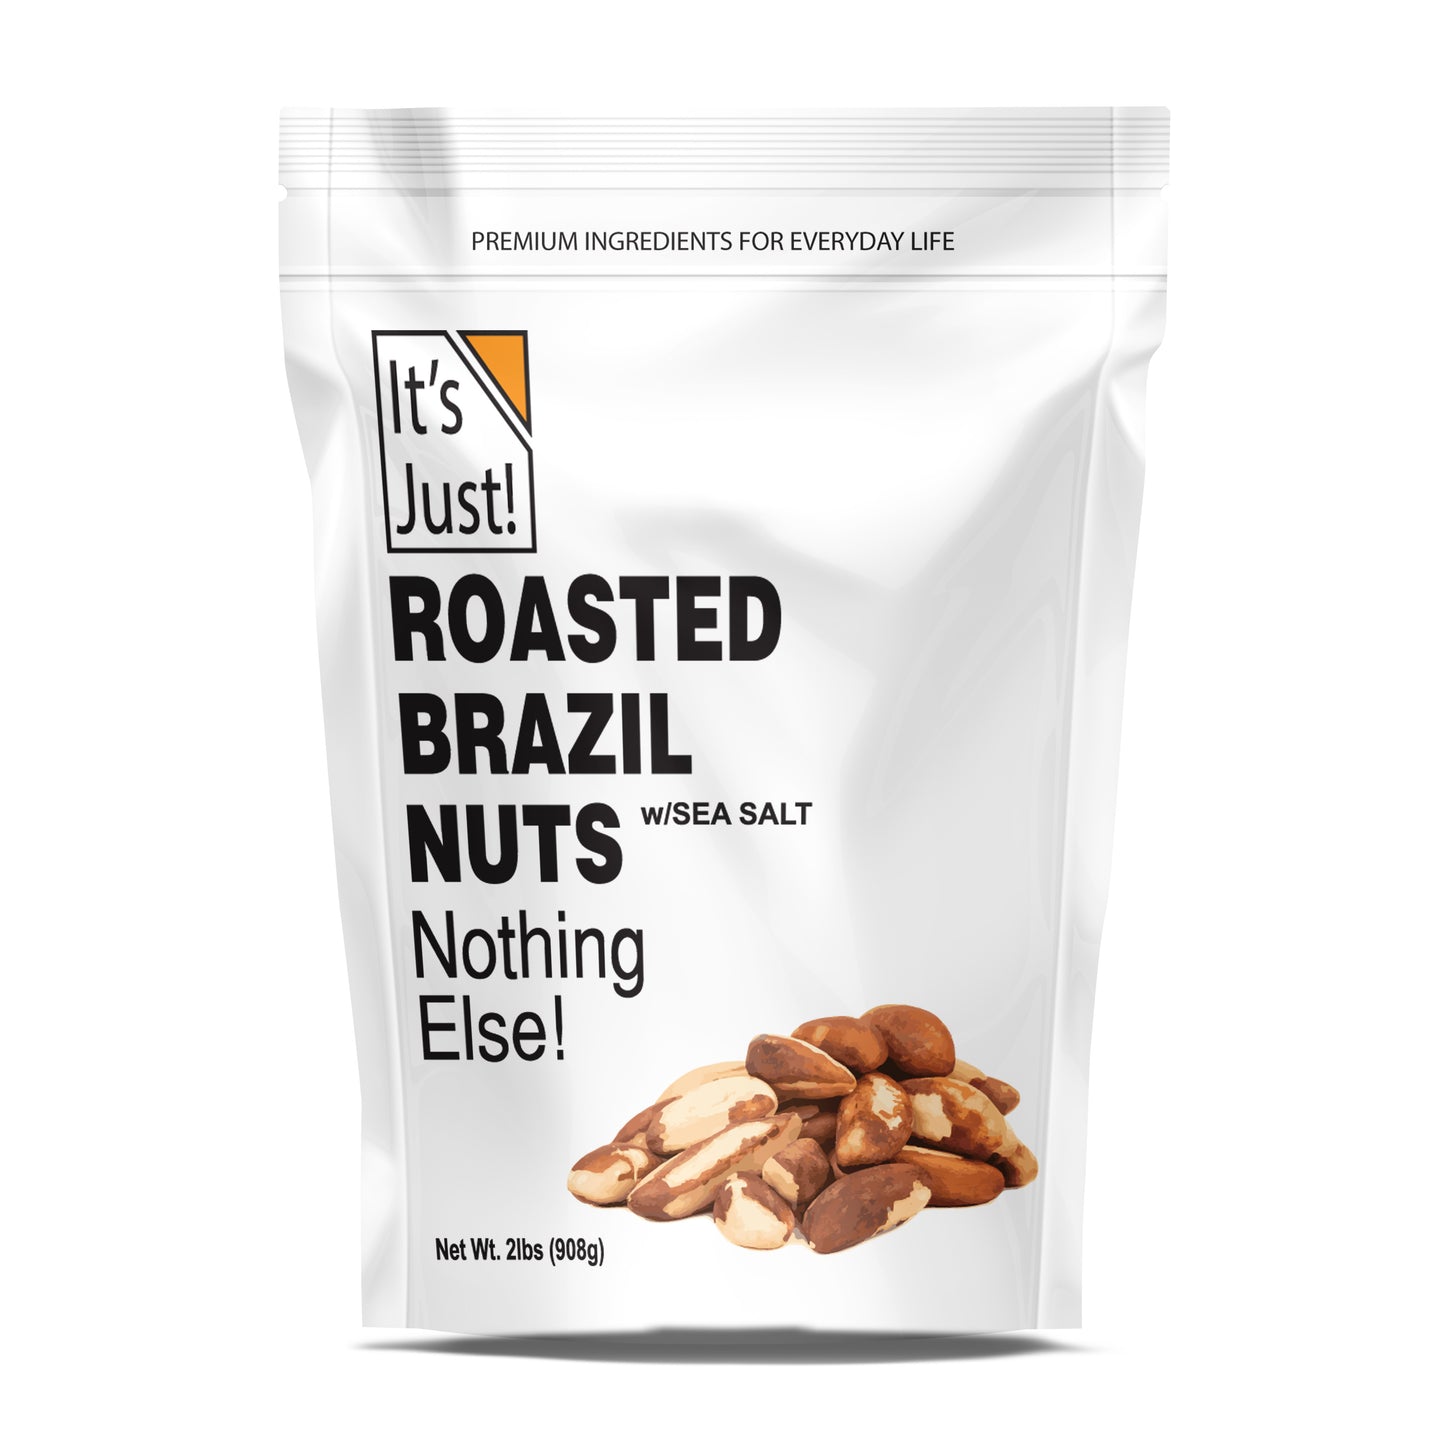 It's Just! - Salted Brazil Nuts